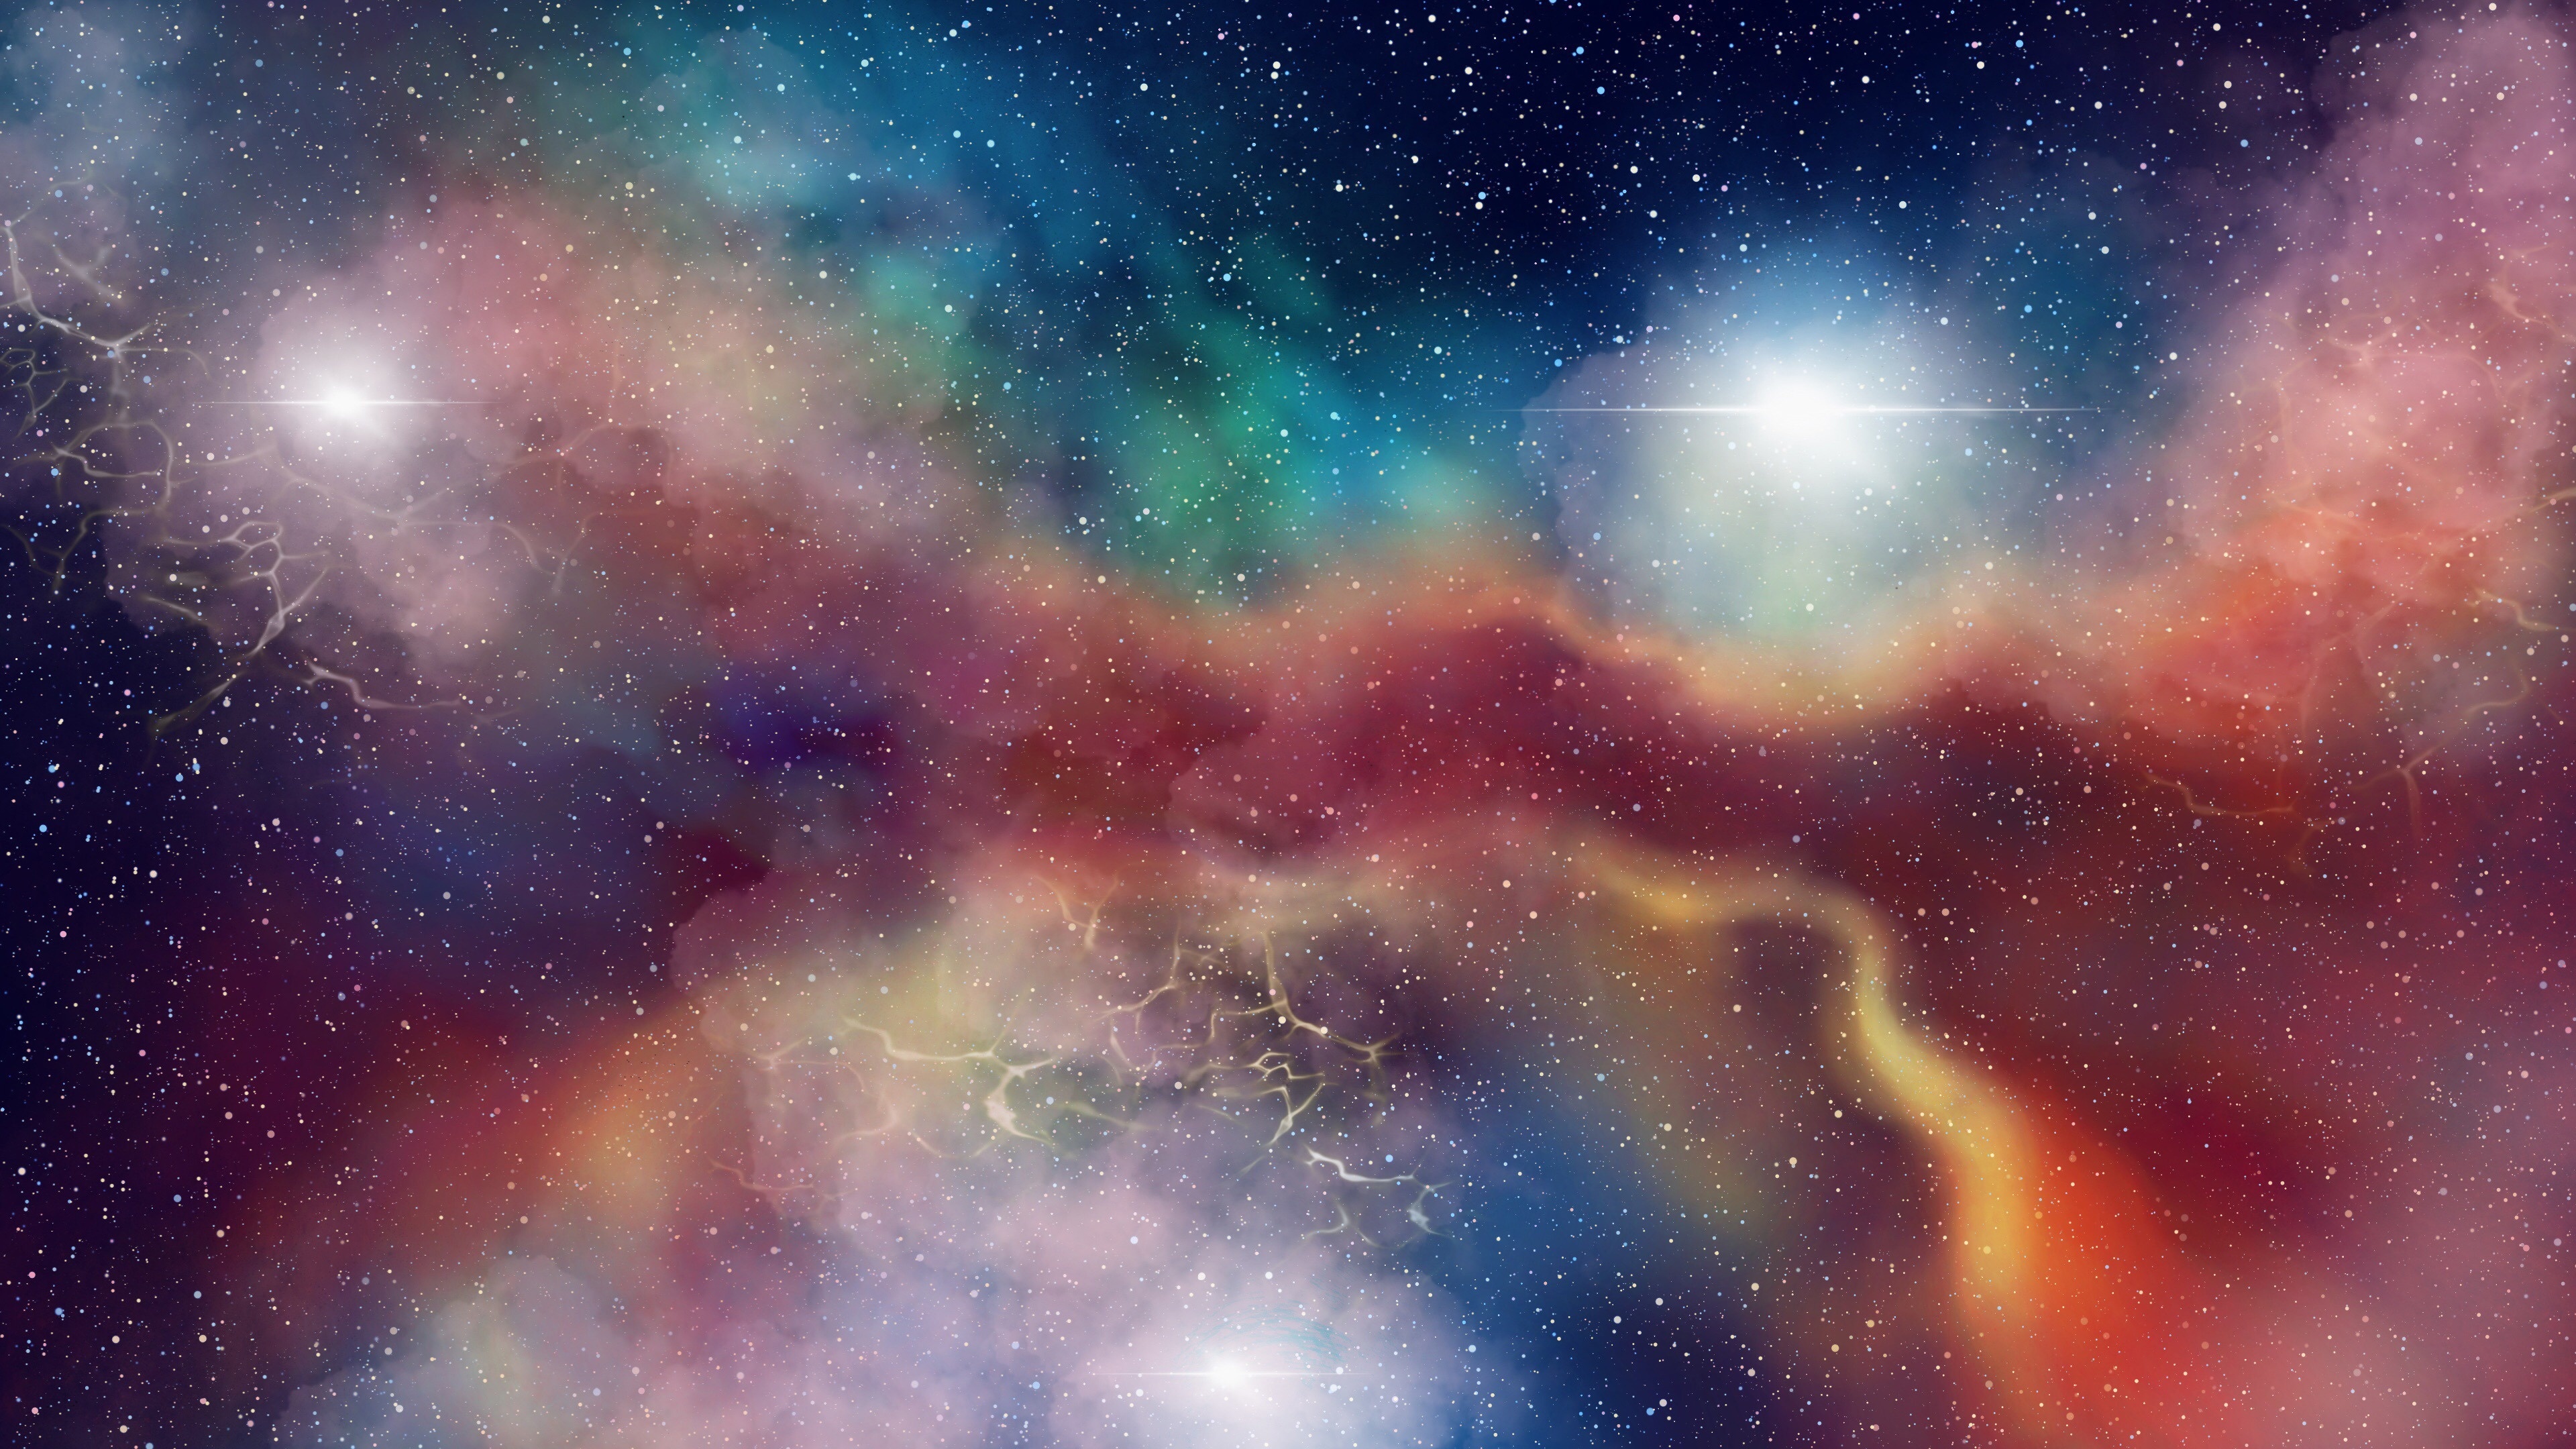 Download 3840x2160 Wallpaper Galaxy Stars Clouds Space Colorful 4k Uhd 16 9 Widescreen 3840x2160 Hd Image Background 6692